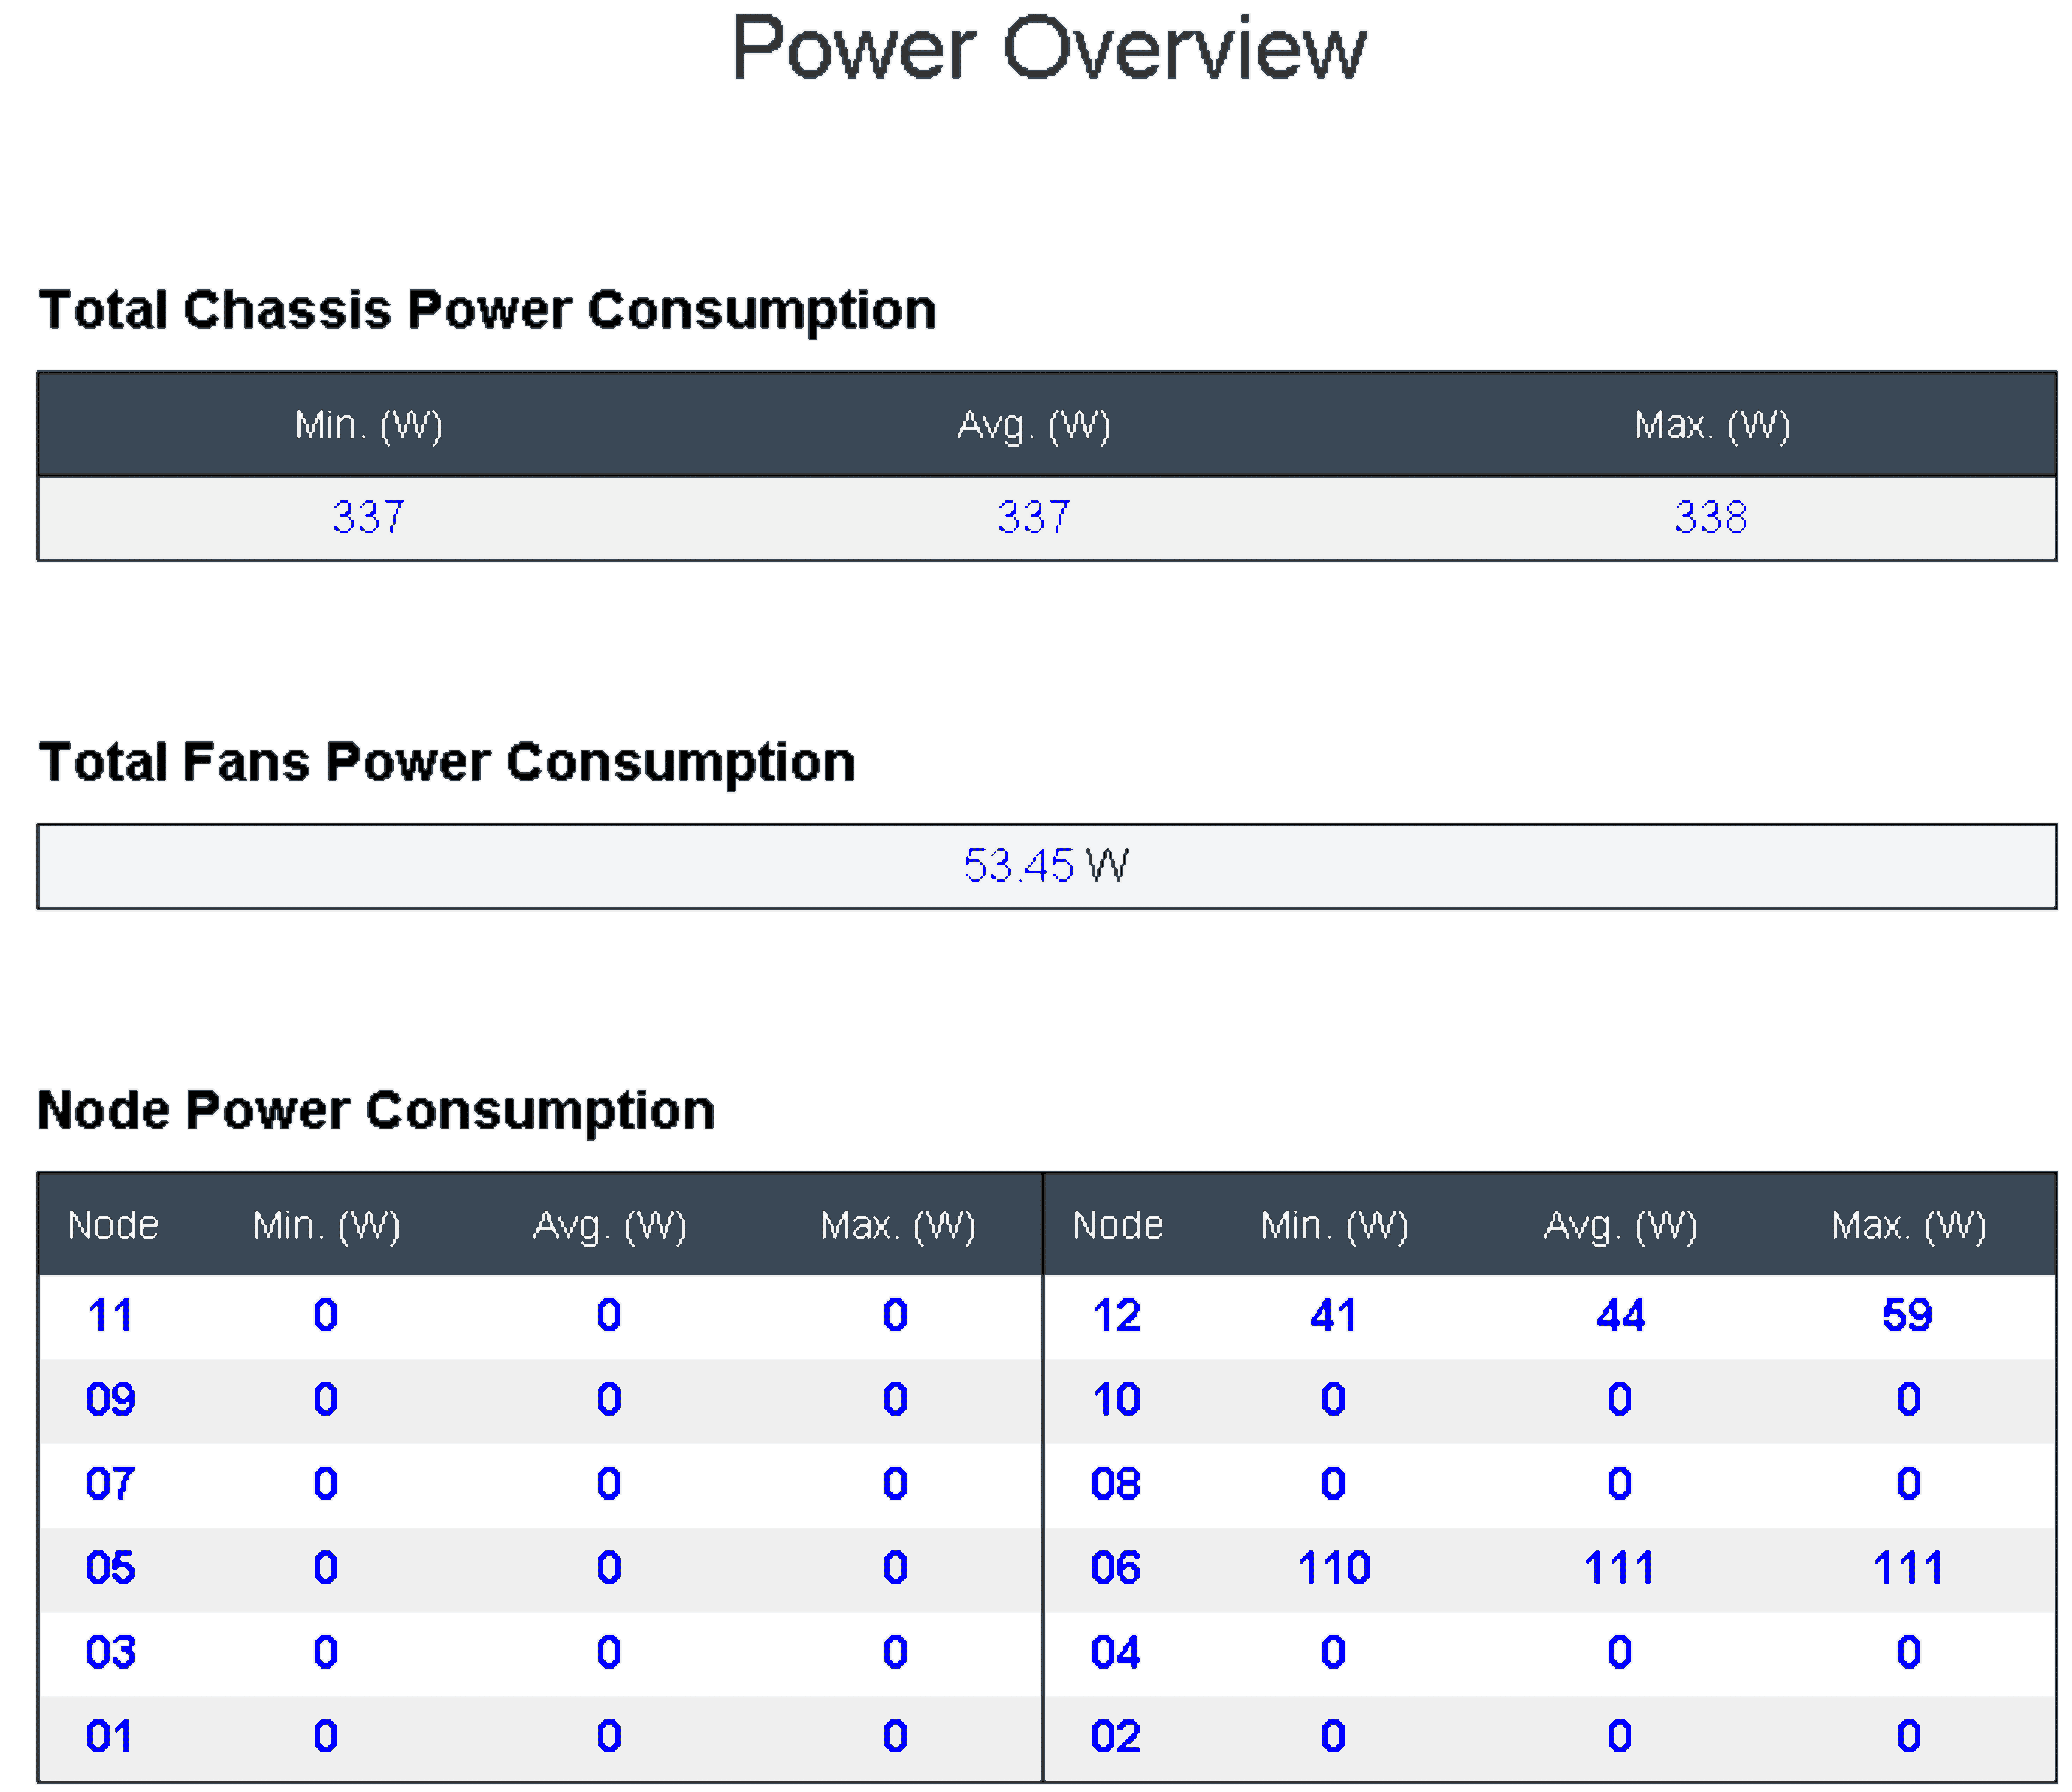 Power Overview